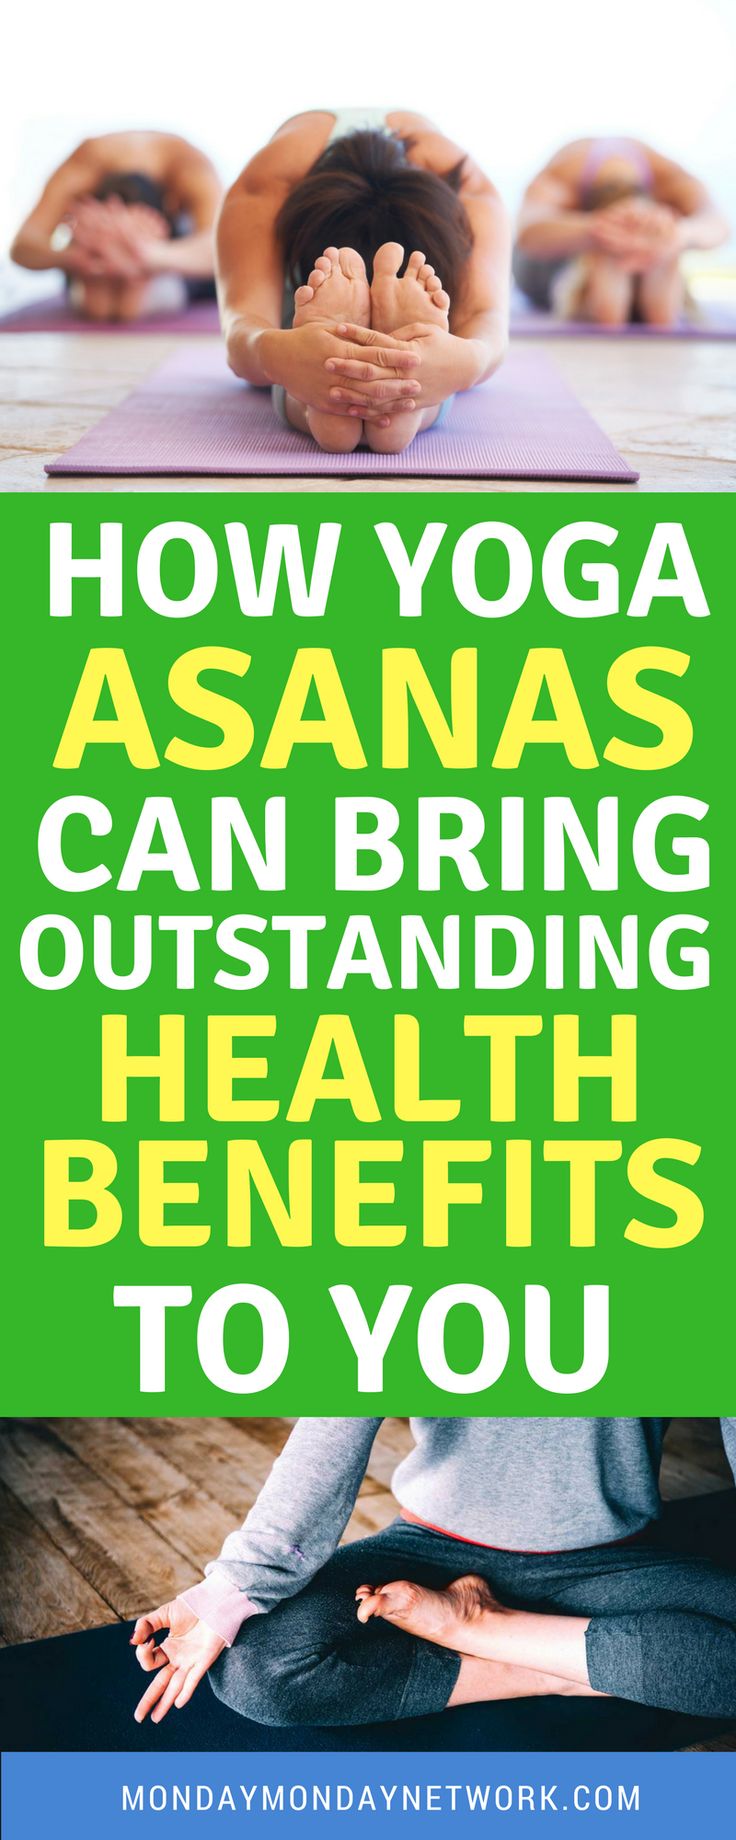 The greater the understanding of yoga asanas, the greater the benefits.